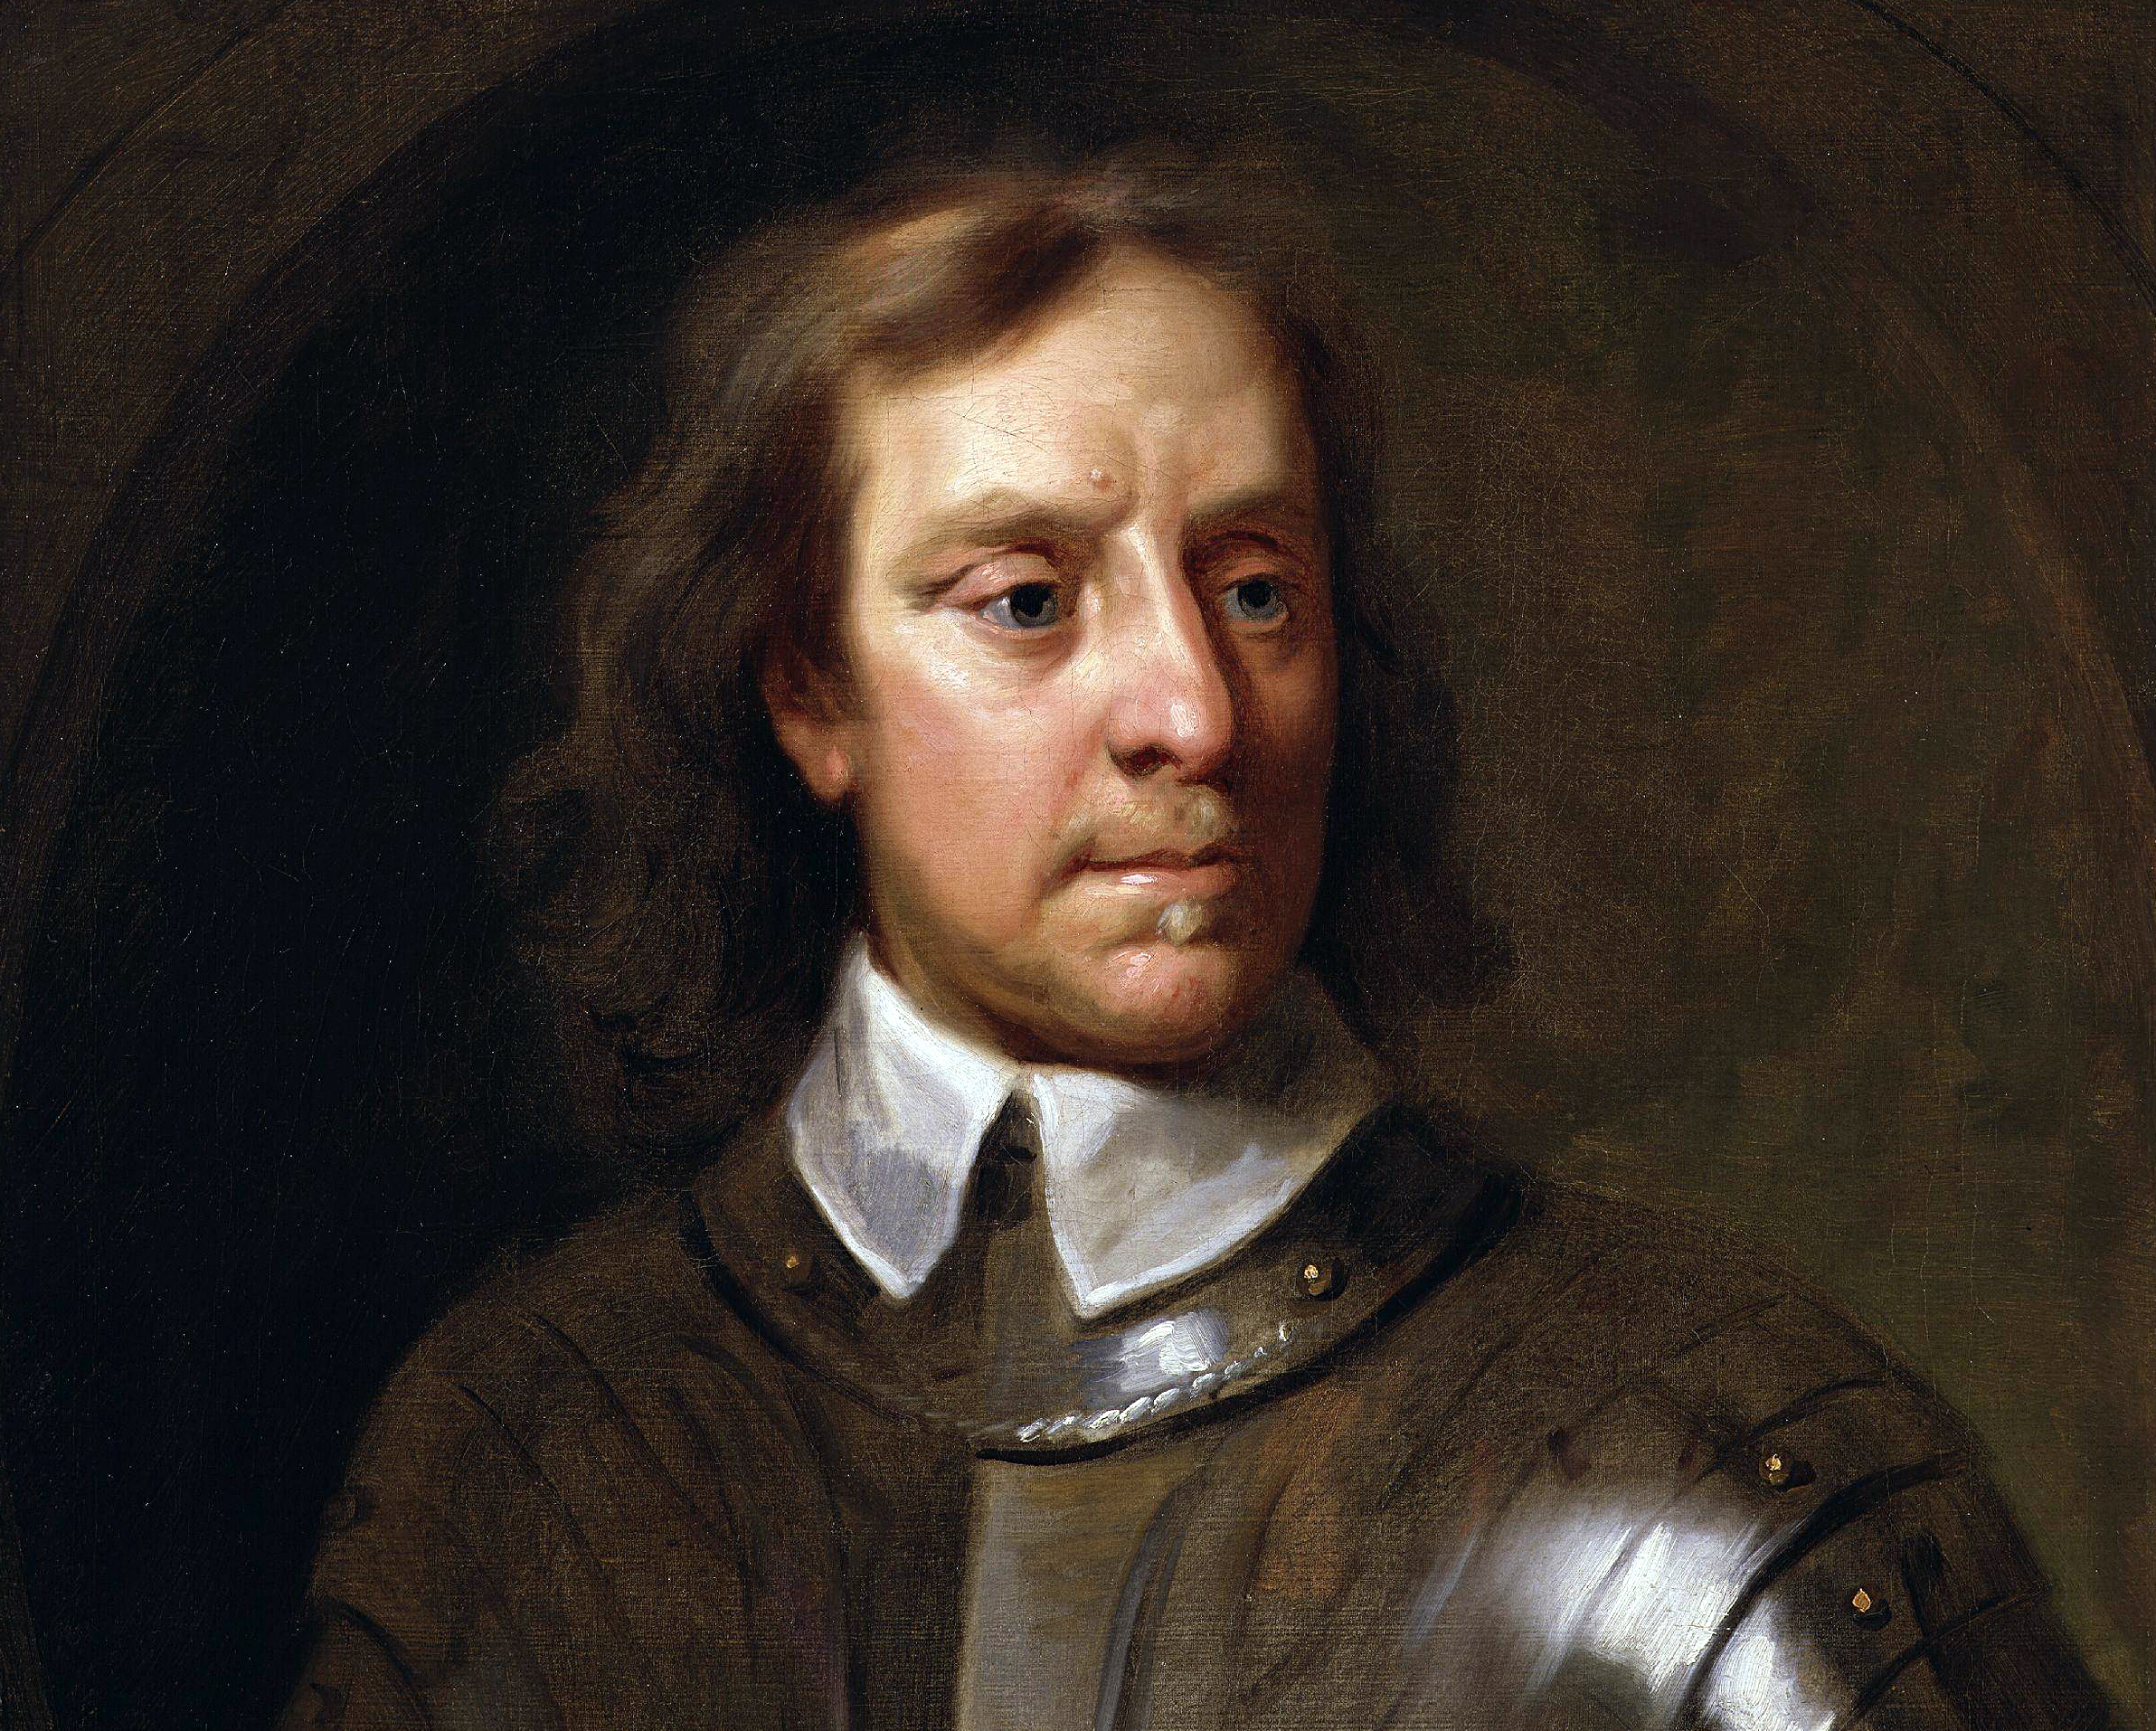 Oliver Cromwell by Samuel Cooper